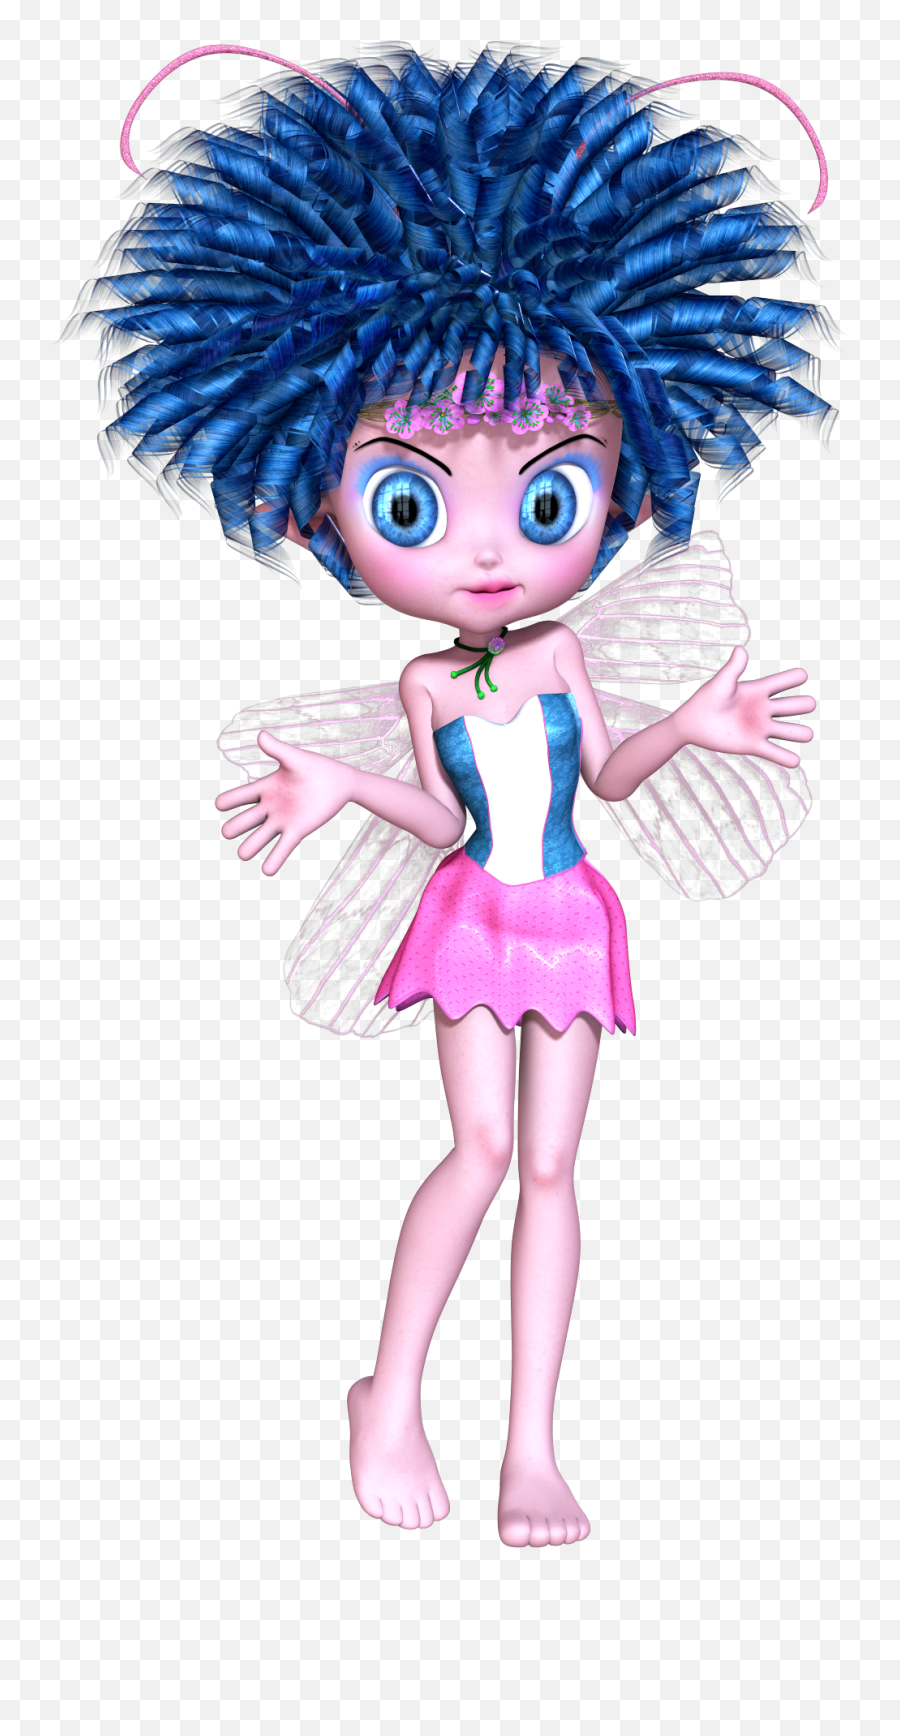 Colorful Fairy With The Blue Hair At White Background Emoji,Fairy Transparent Background